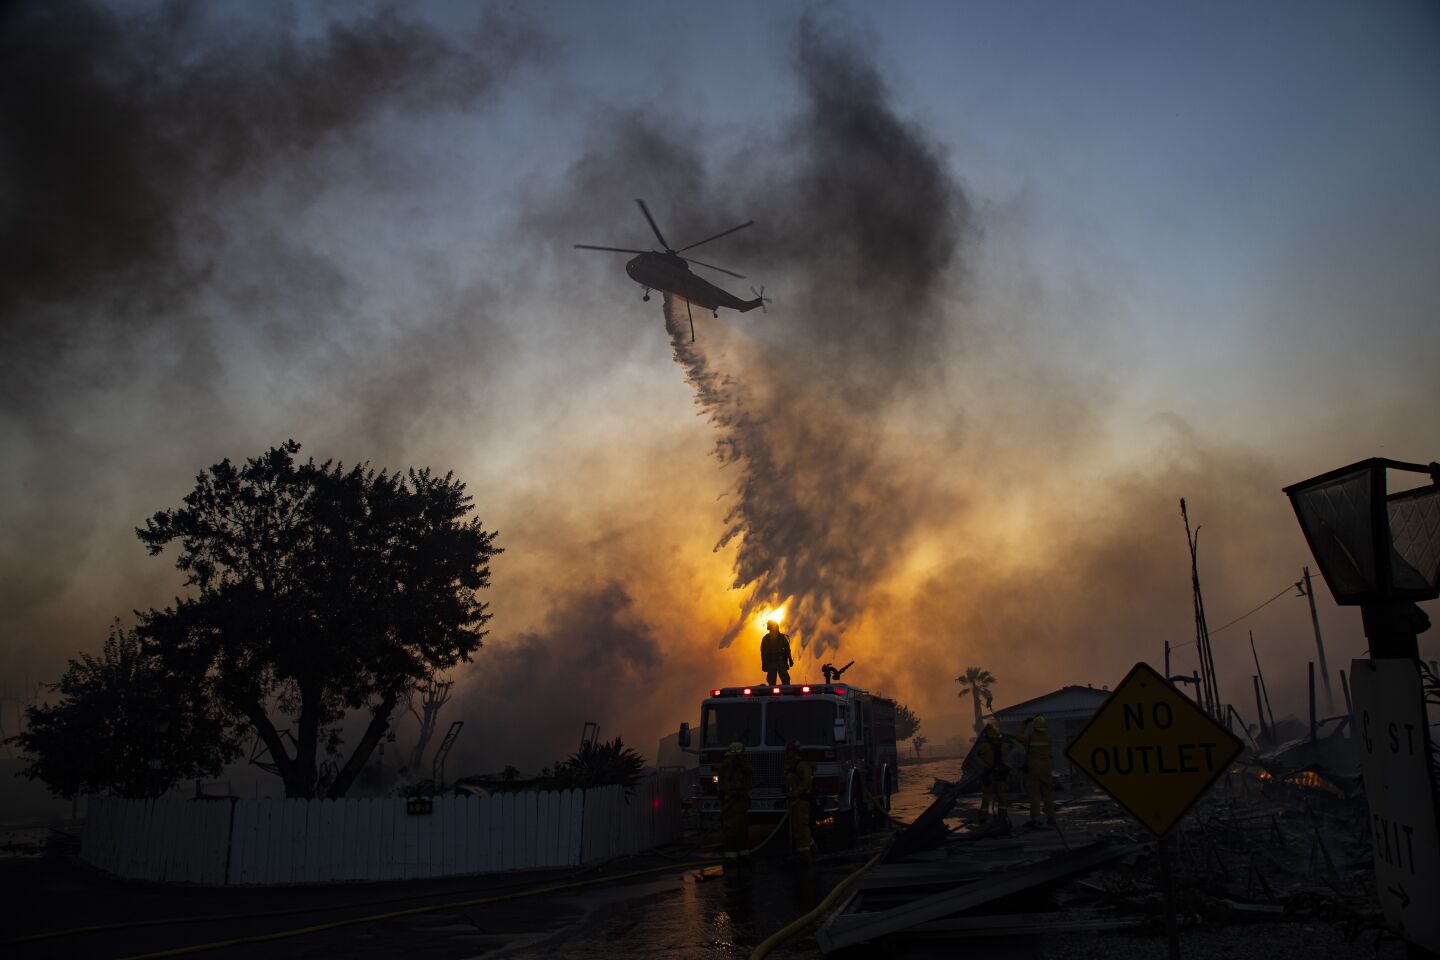 CALIMESA, CA - OCTOBER 10, 2019: A water dropping helicopter drops water on burning mobile homes to try and keep the Sandalwood fire from spreading at Villa Calimesa mobile home park on October 10, 2019 in Calimesa, California. Multiple mobile homes were lost in the fire.(Gina Ferazzi/Los AngelesTimes)